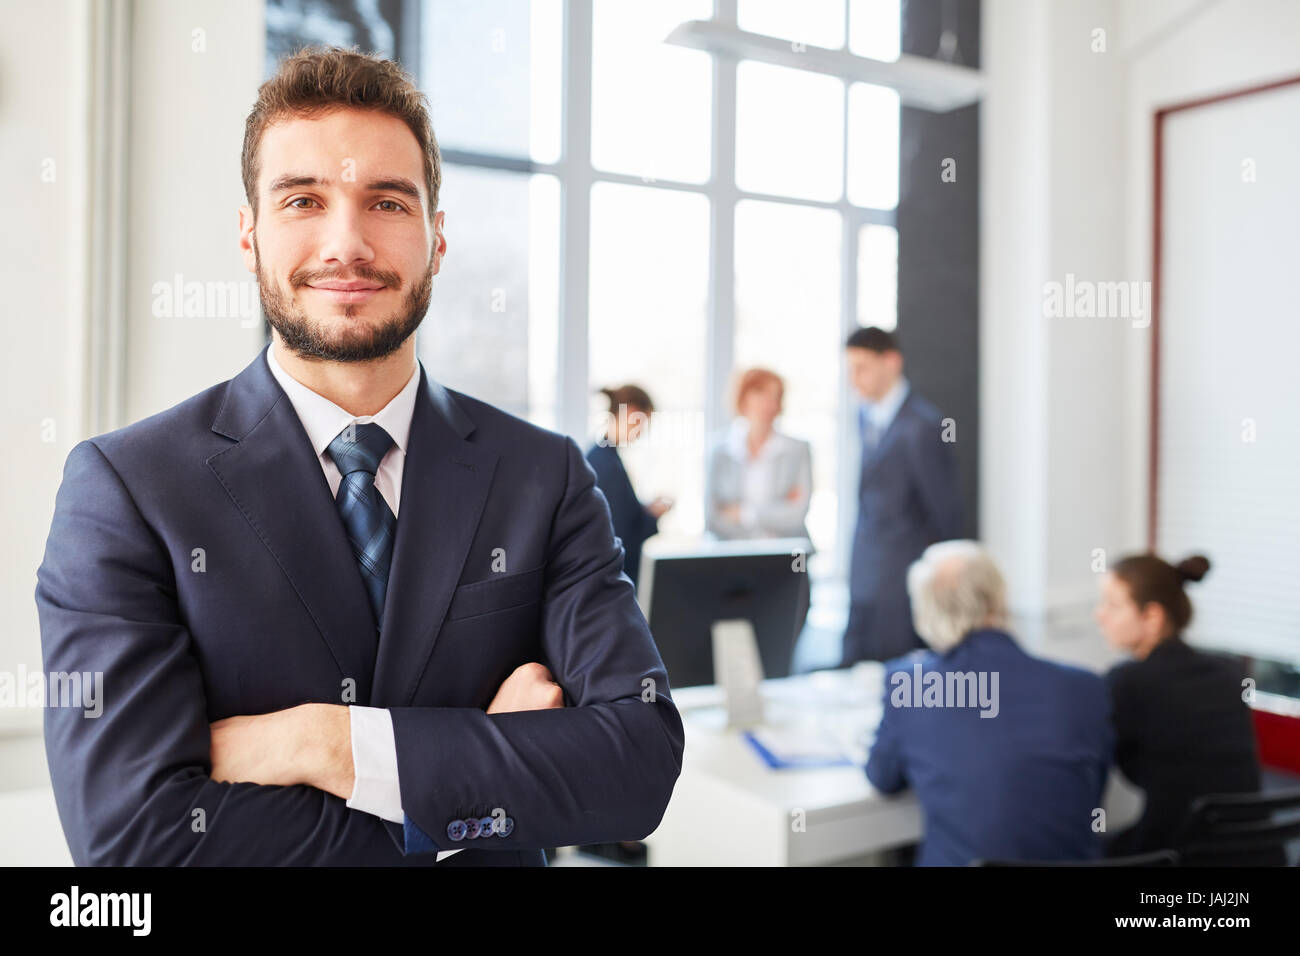 Man as self confident consultant entrepreneur with competence Stock Photo